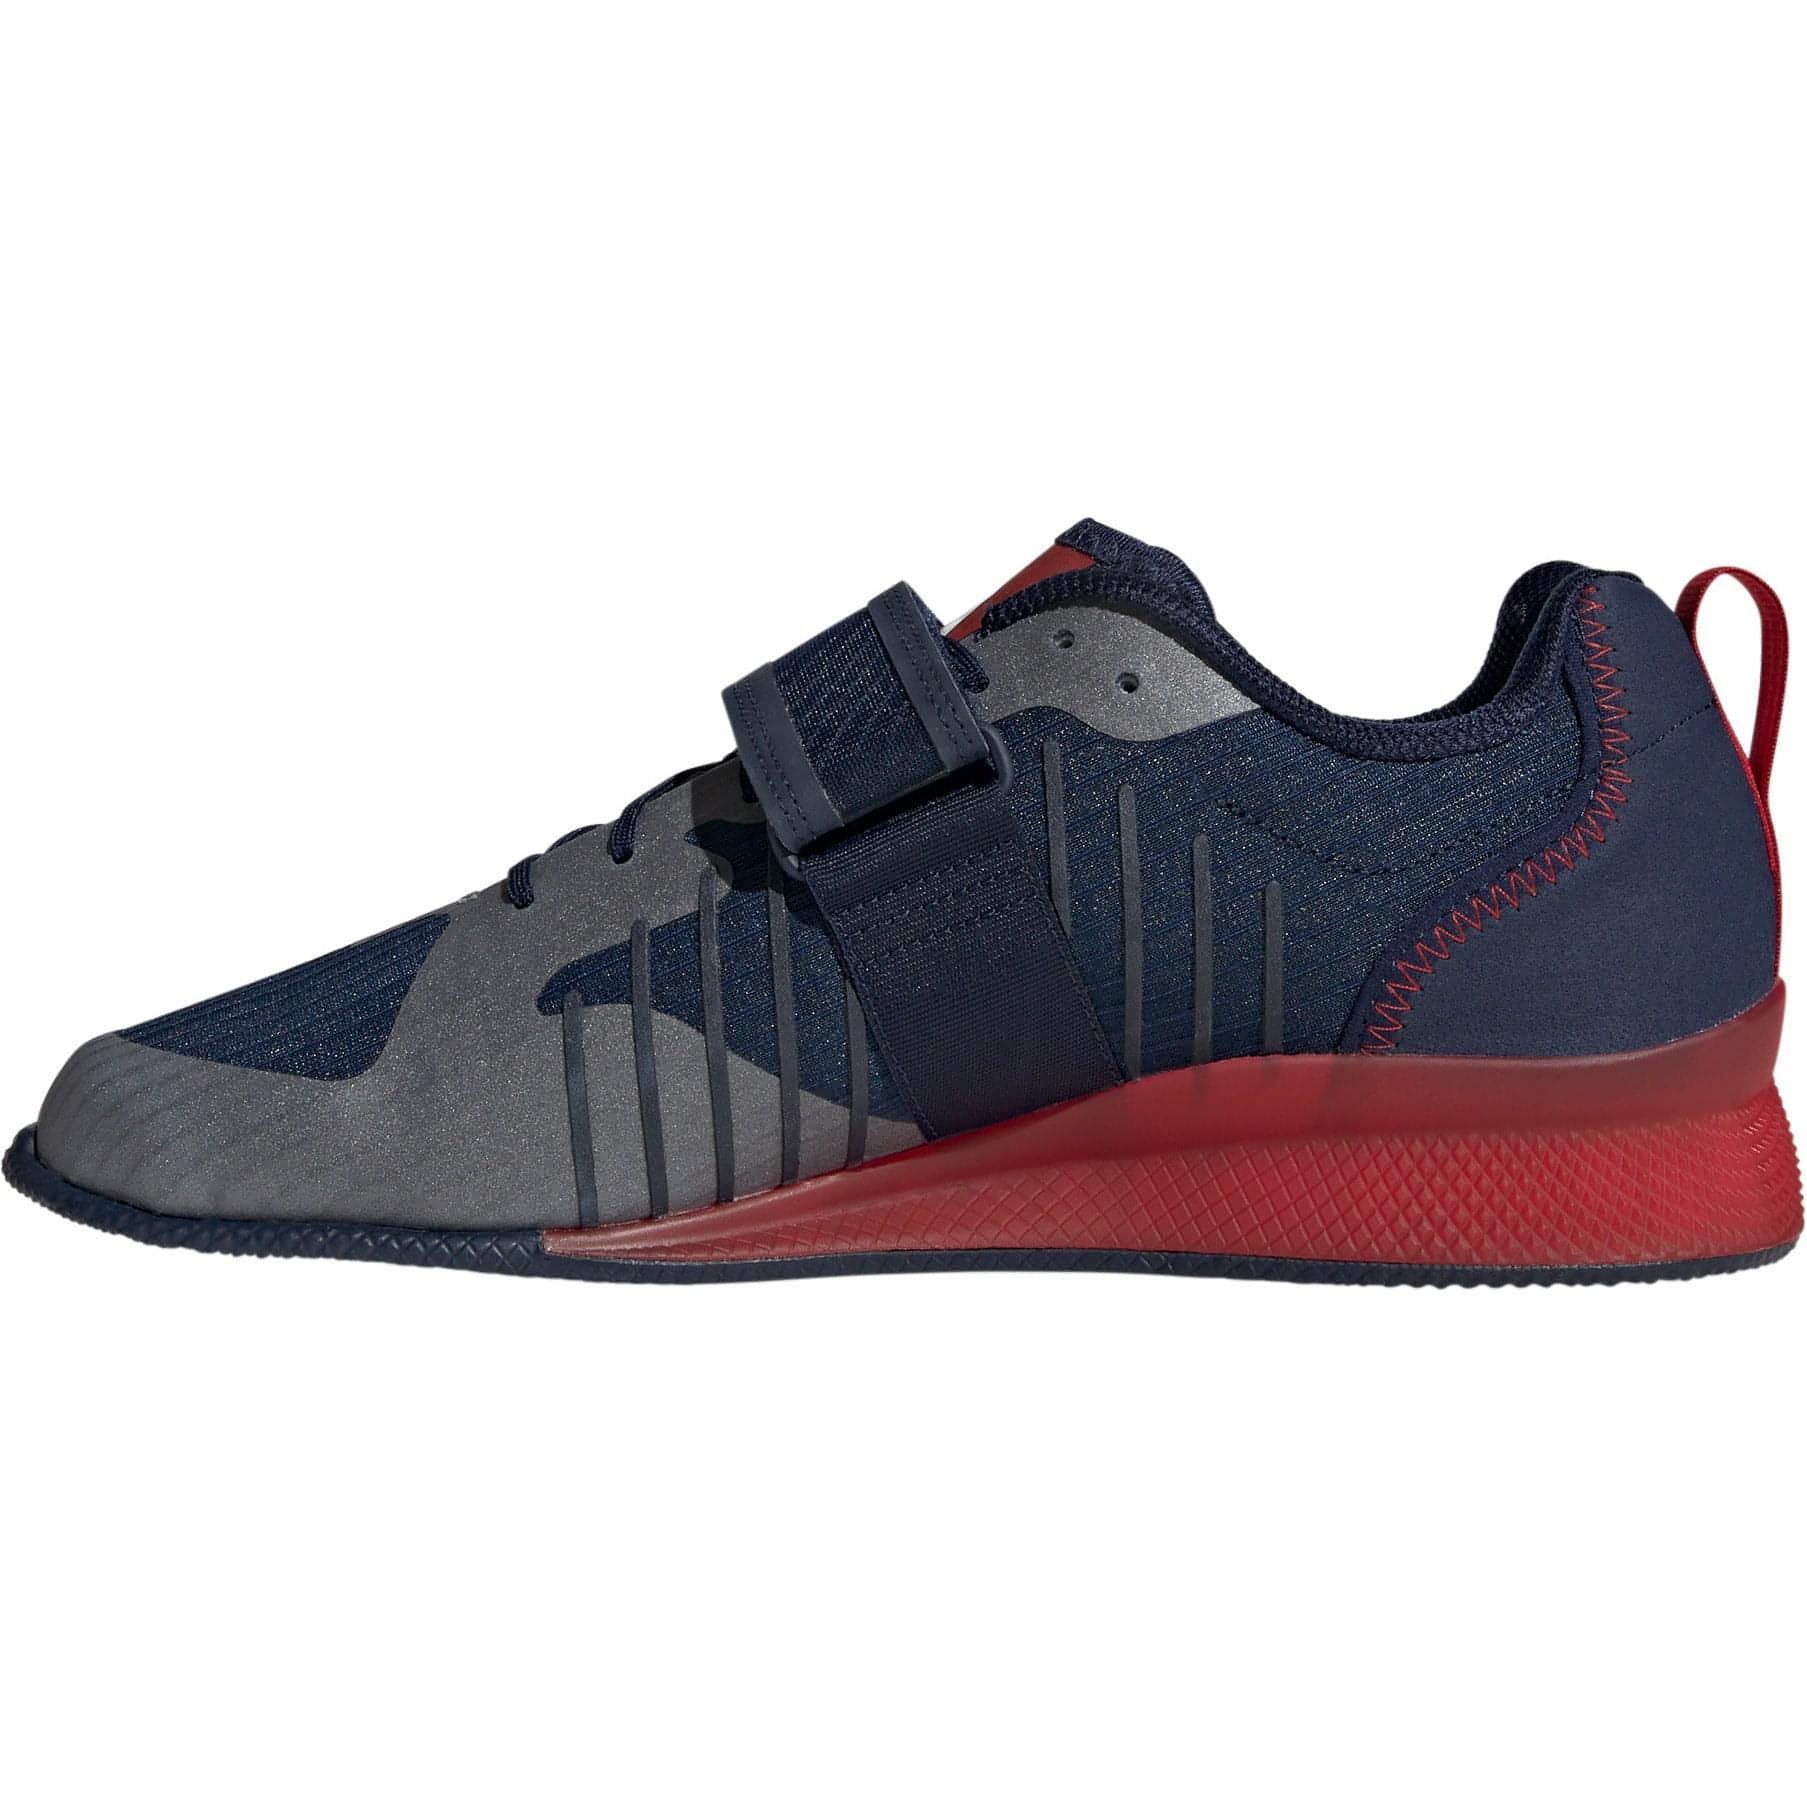 Adidas Adipower Weightlifting Shoes Hq3527 Inside - Side View